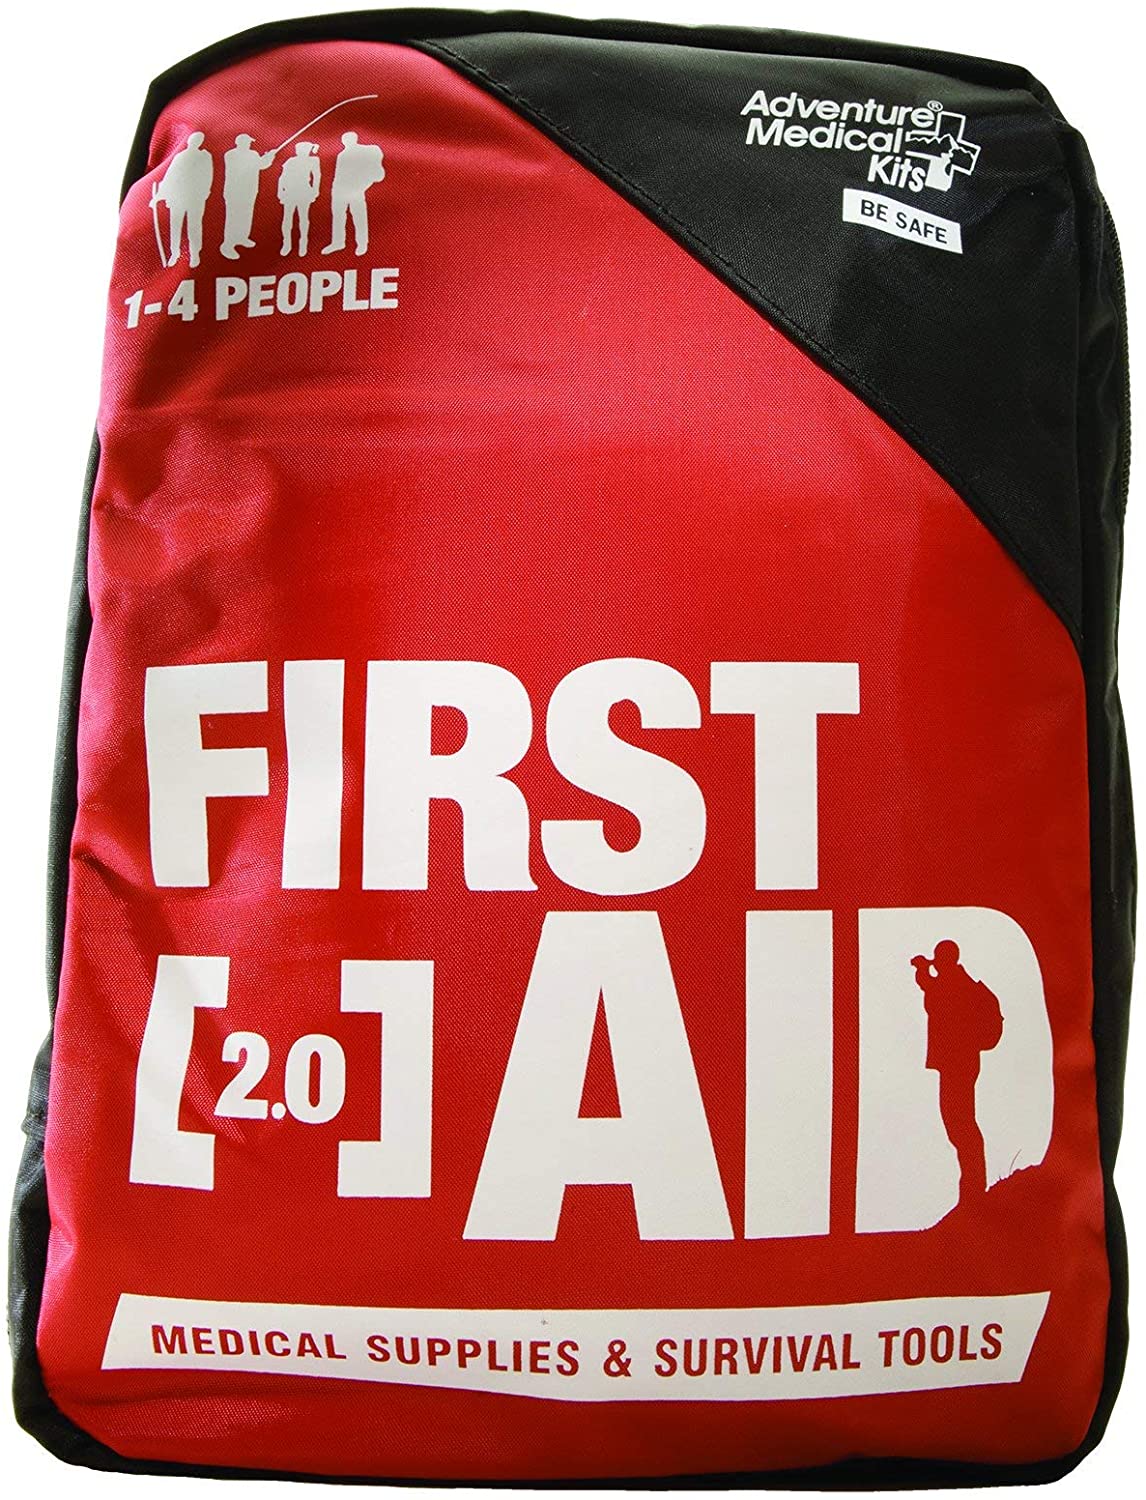 Adventure Medical Kits Adventure First Aid 2.0 First Aid Kit, Easy Care, Survival Items, Active Families, First Aid Essentials, Durable Case, Fully Stocked, 1lb 1oz - image 2 of 7